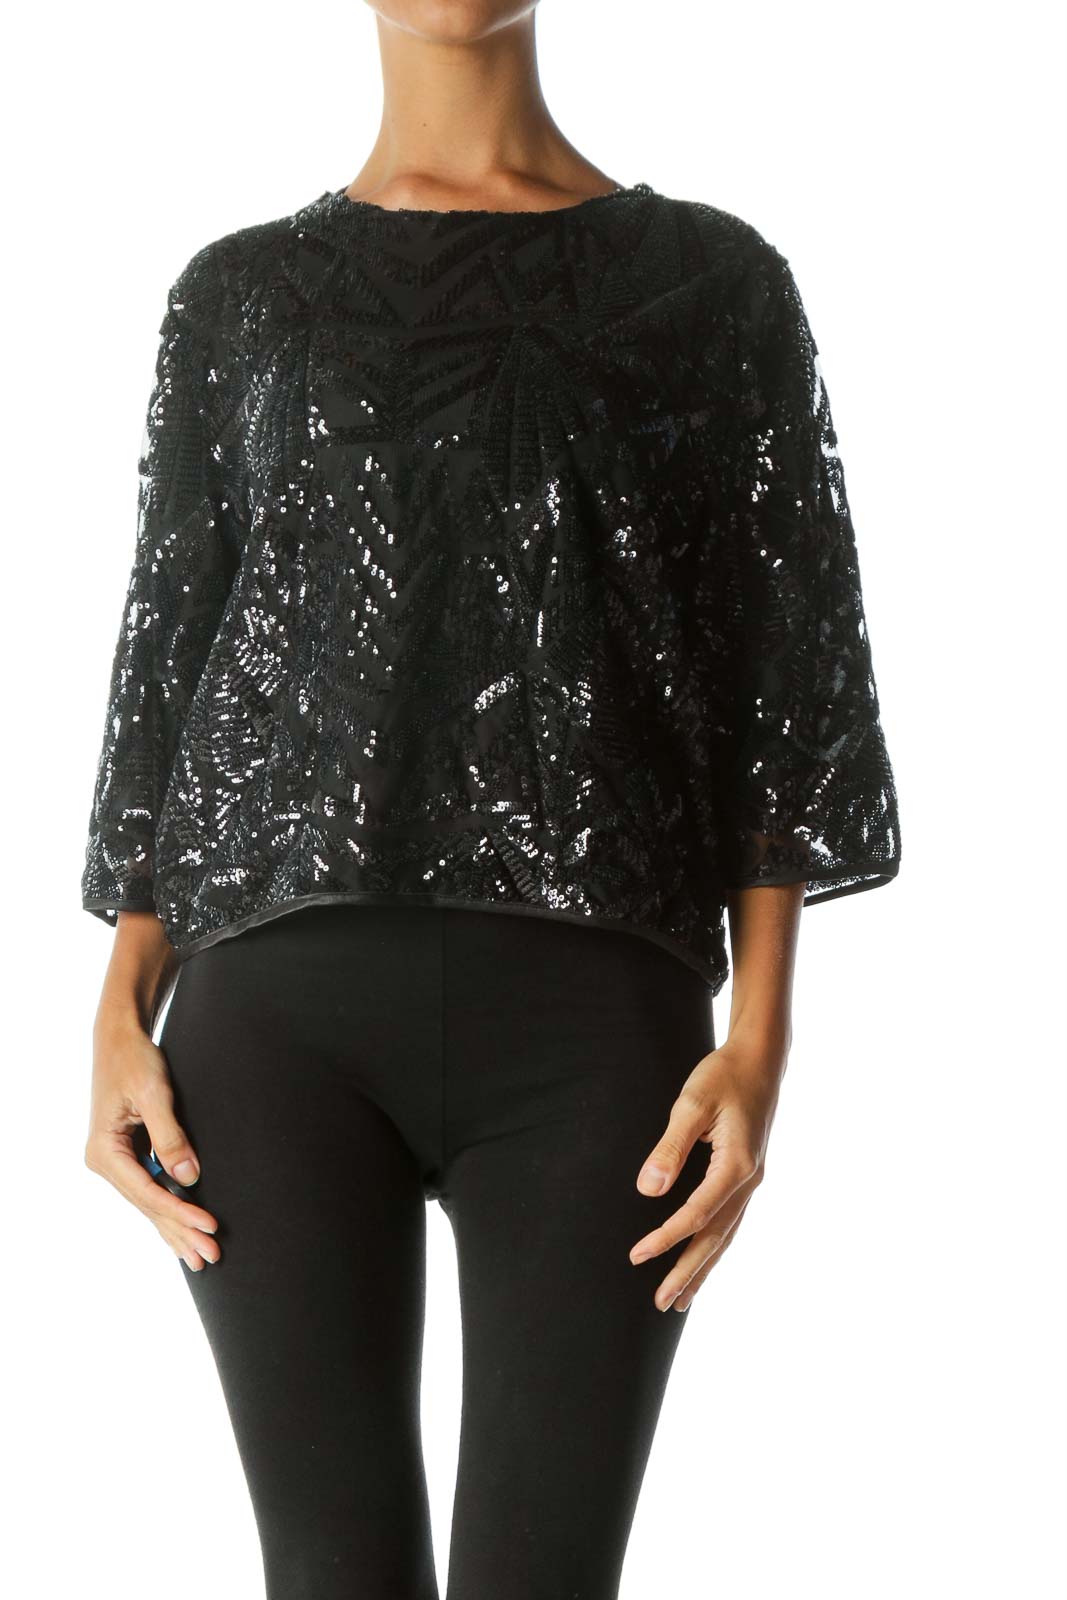 Black Sequined Pattern Round Neck 3/4-Sleeve Top Front